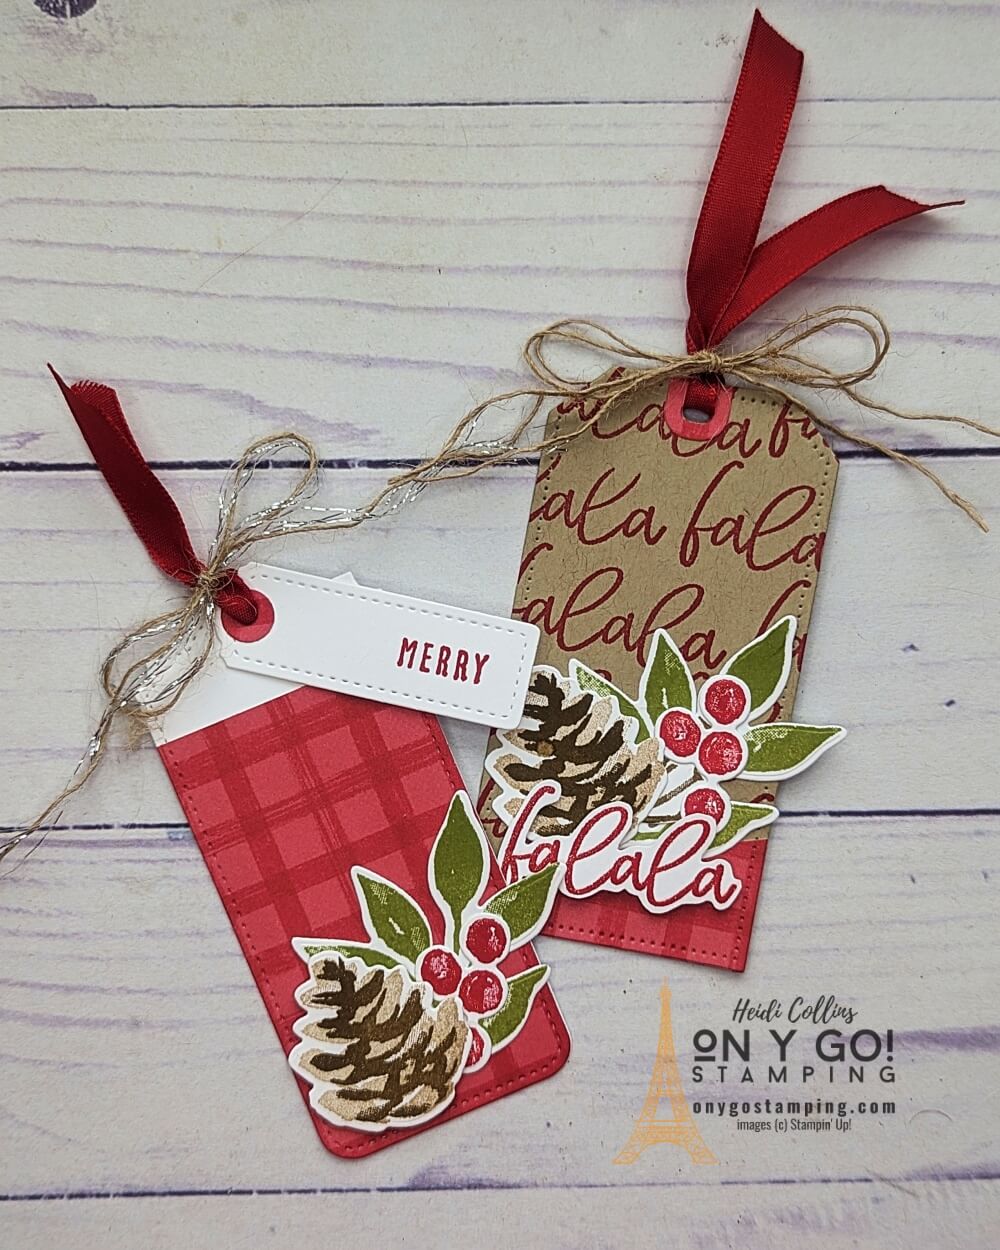 Make your Christmas presents extra special with handmade gift tags using the Christmas Season and Framed & Festive stamp sets from Stampin' Up!